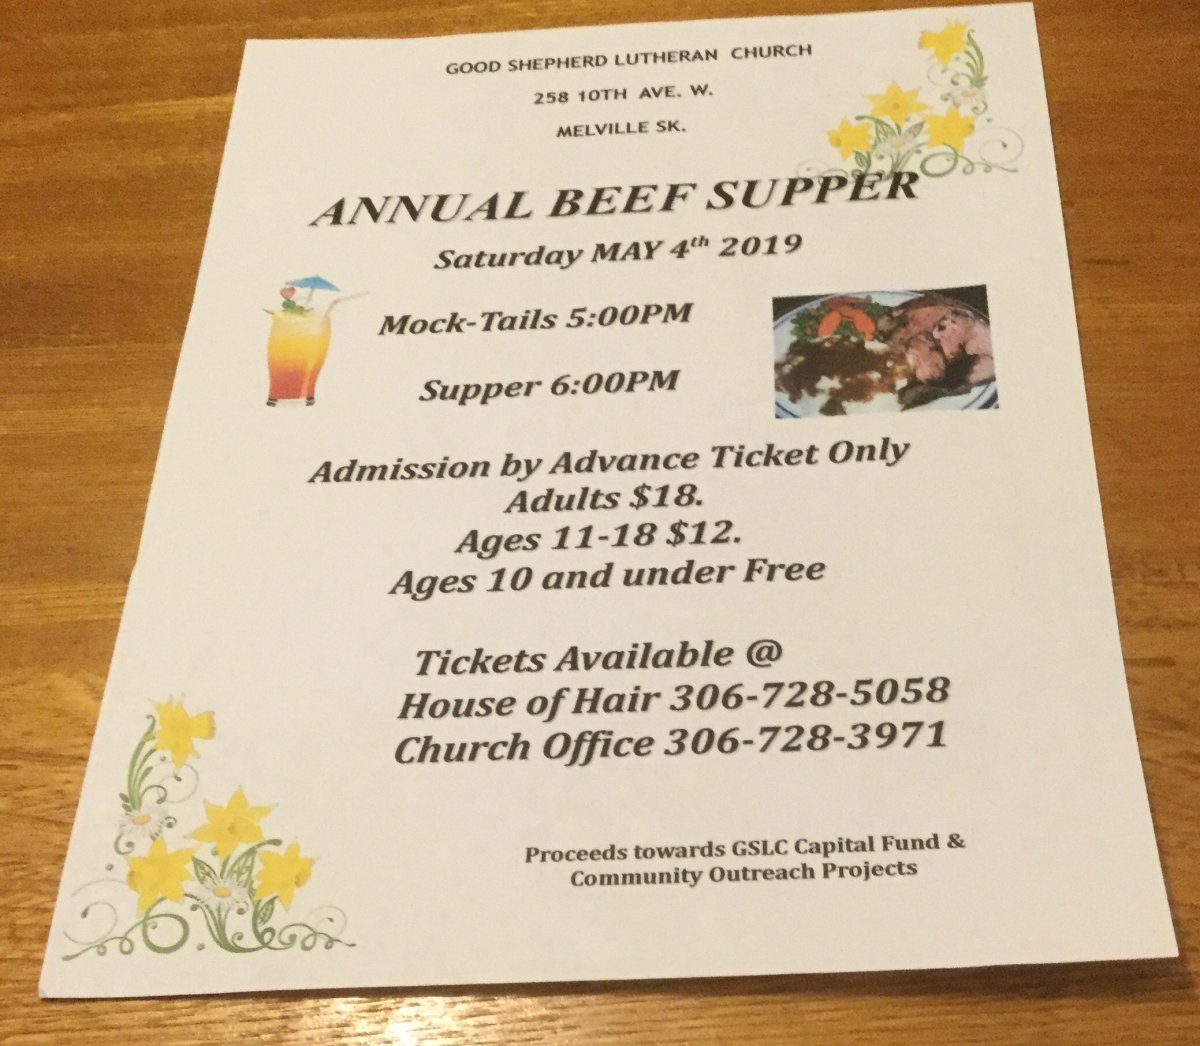 Annual Beef Supper - image